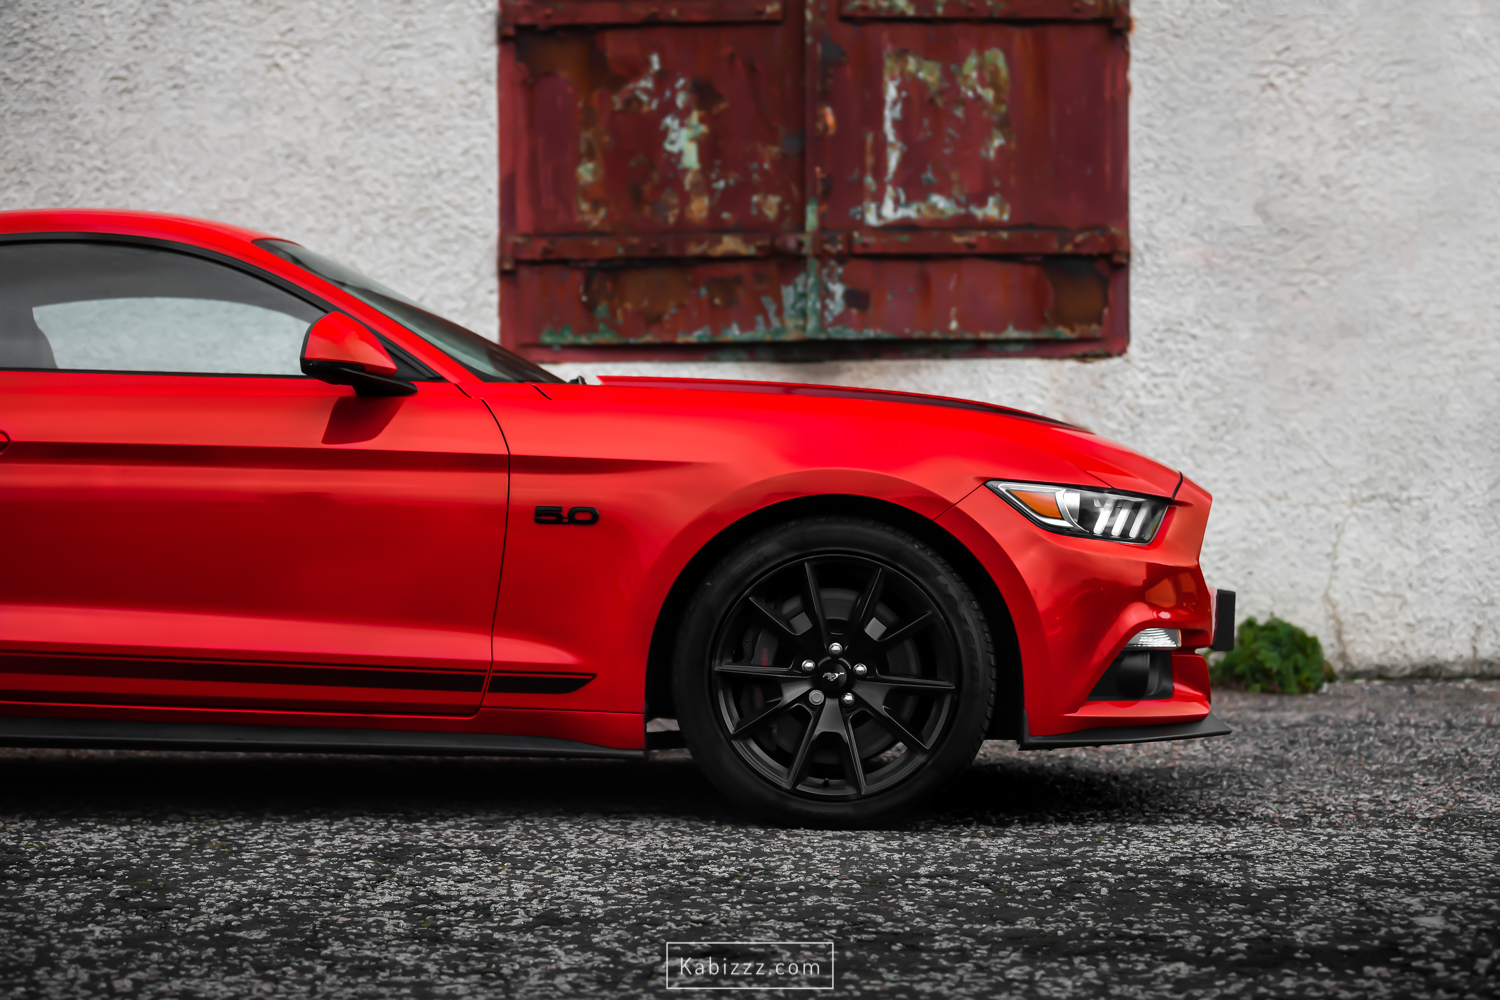 2018_ford_mustang_red_scotland_photography_automotive_photography_kabizzz-4.jpg